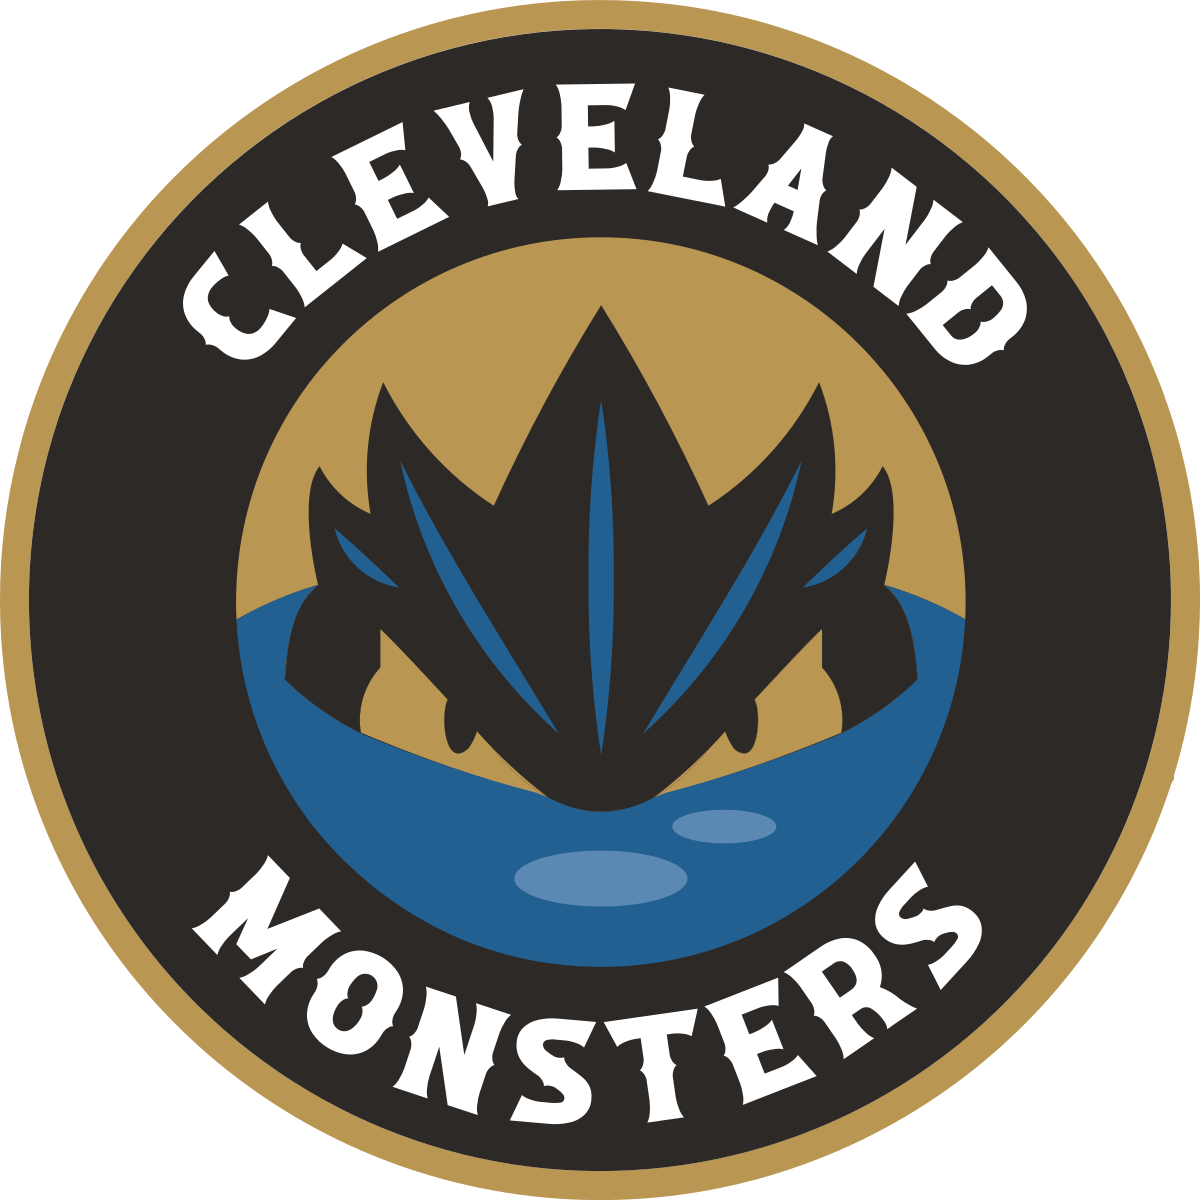 Cleveland Monsters - Wikipedia